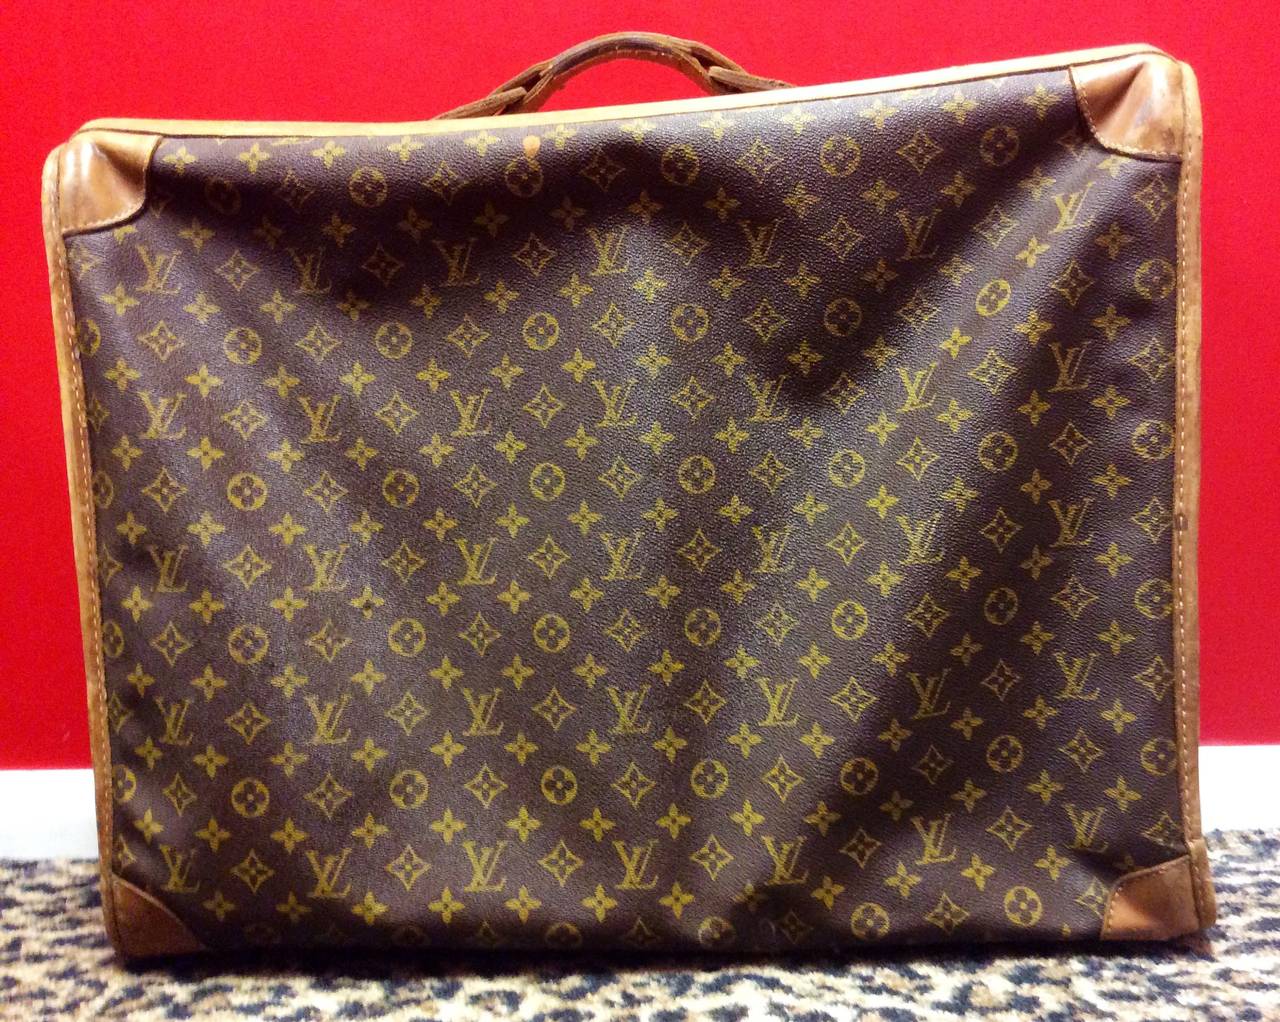 Vintage Louis Vuitton French Company Monogram Luggage Suitcase In Fair Condition For Sale In Lake Park, FL